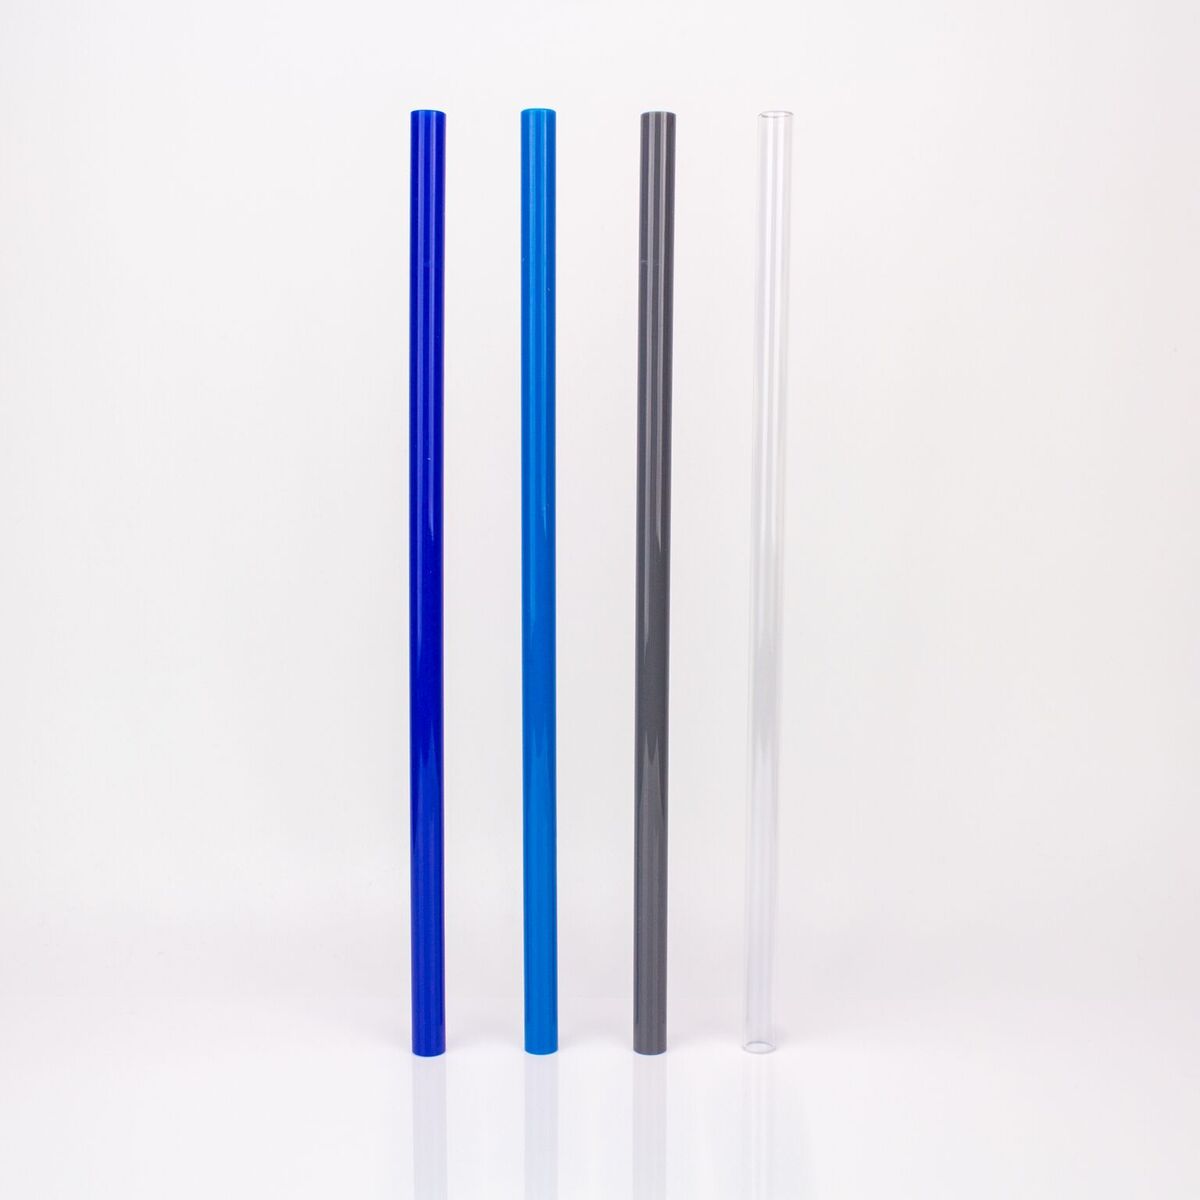 Tegion 12 Inch Extra Long Reusable Silicone Straight Straws for